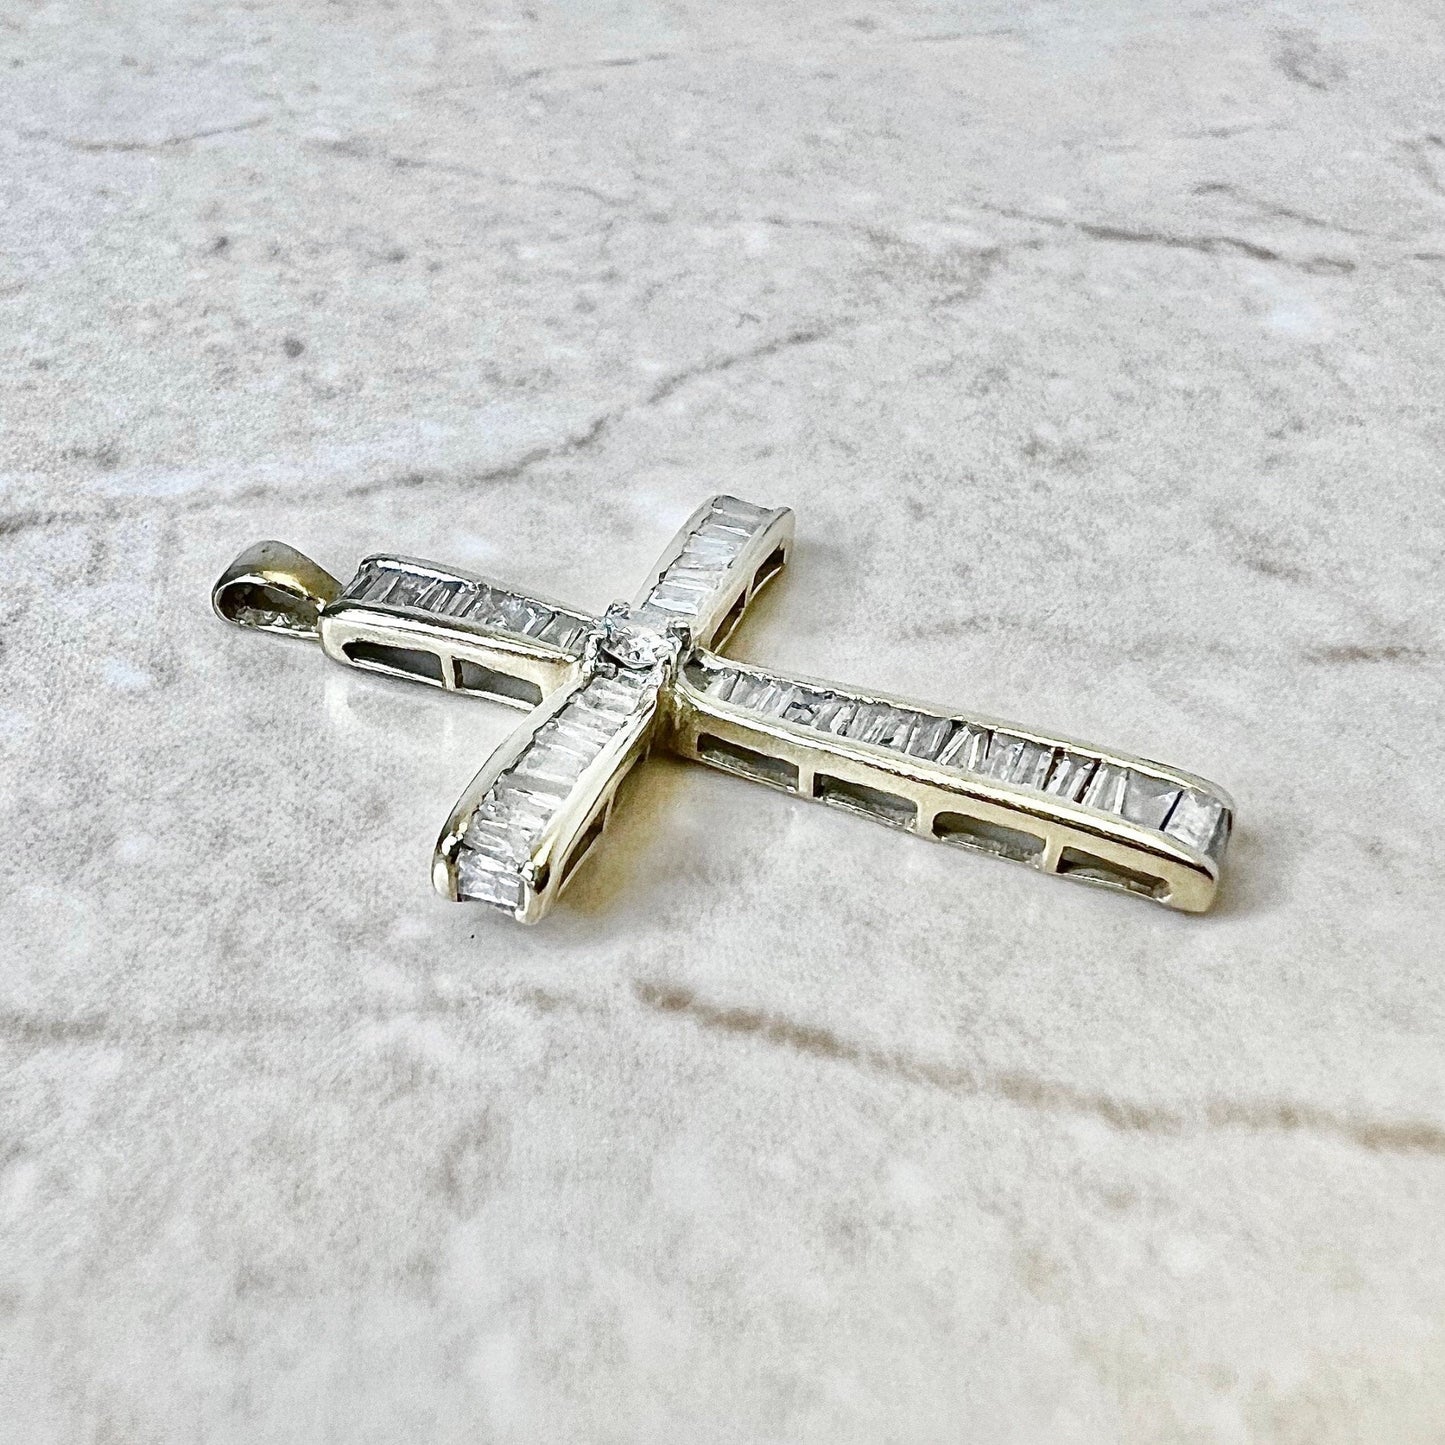 Vintage 10K Diamond Cross Pendant Necklace 1 CTTW - Yellow Gold Diamond Pendant - Religious Jewelry - Mother’s Day Gift - Best Gifts For Her